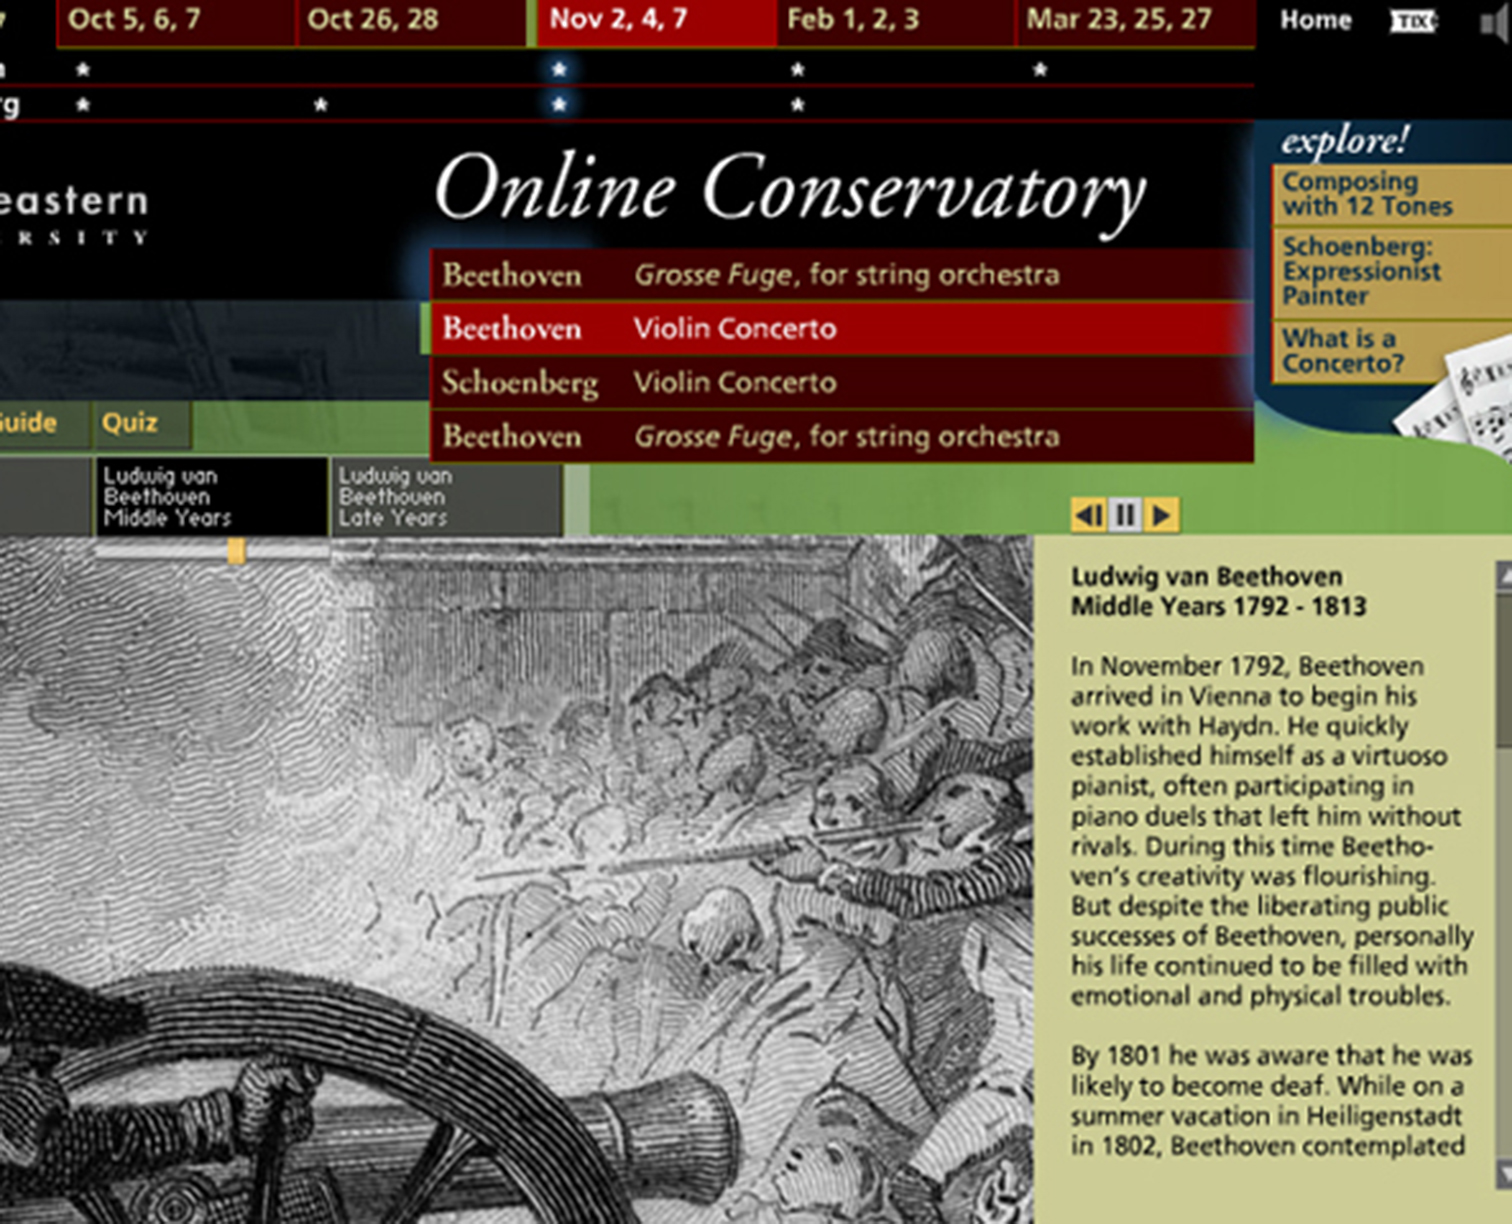 BSO Online Conservatory